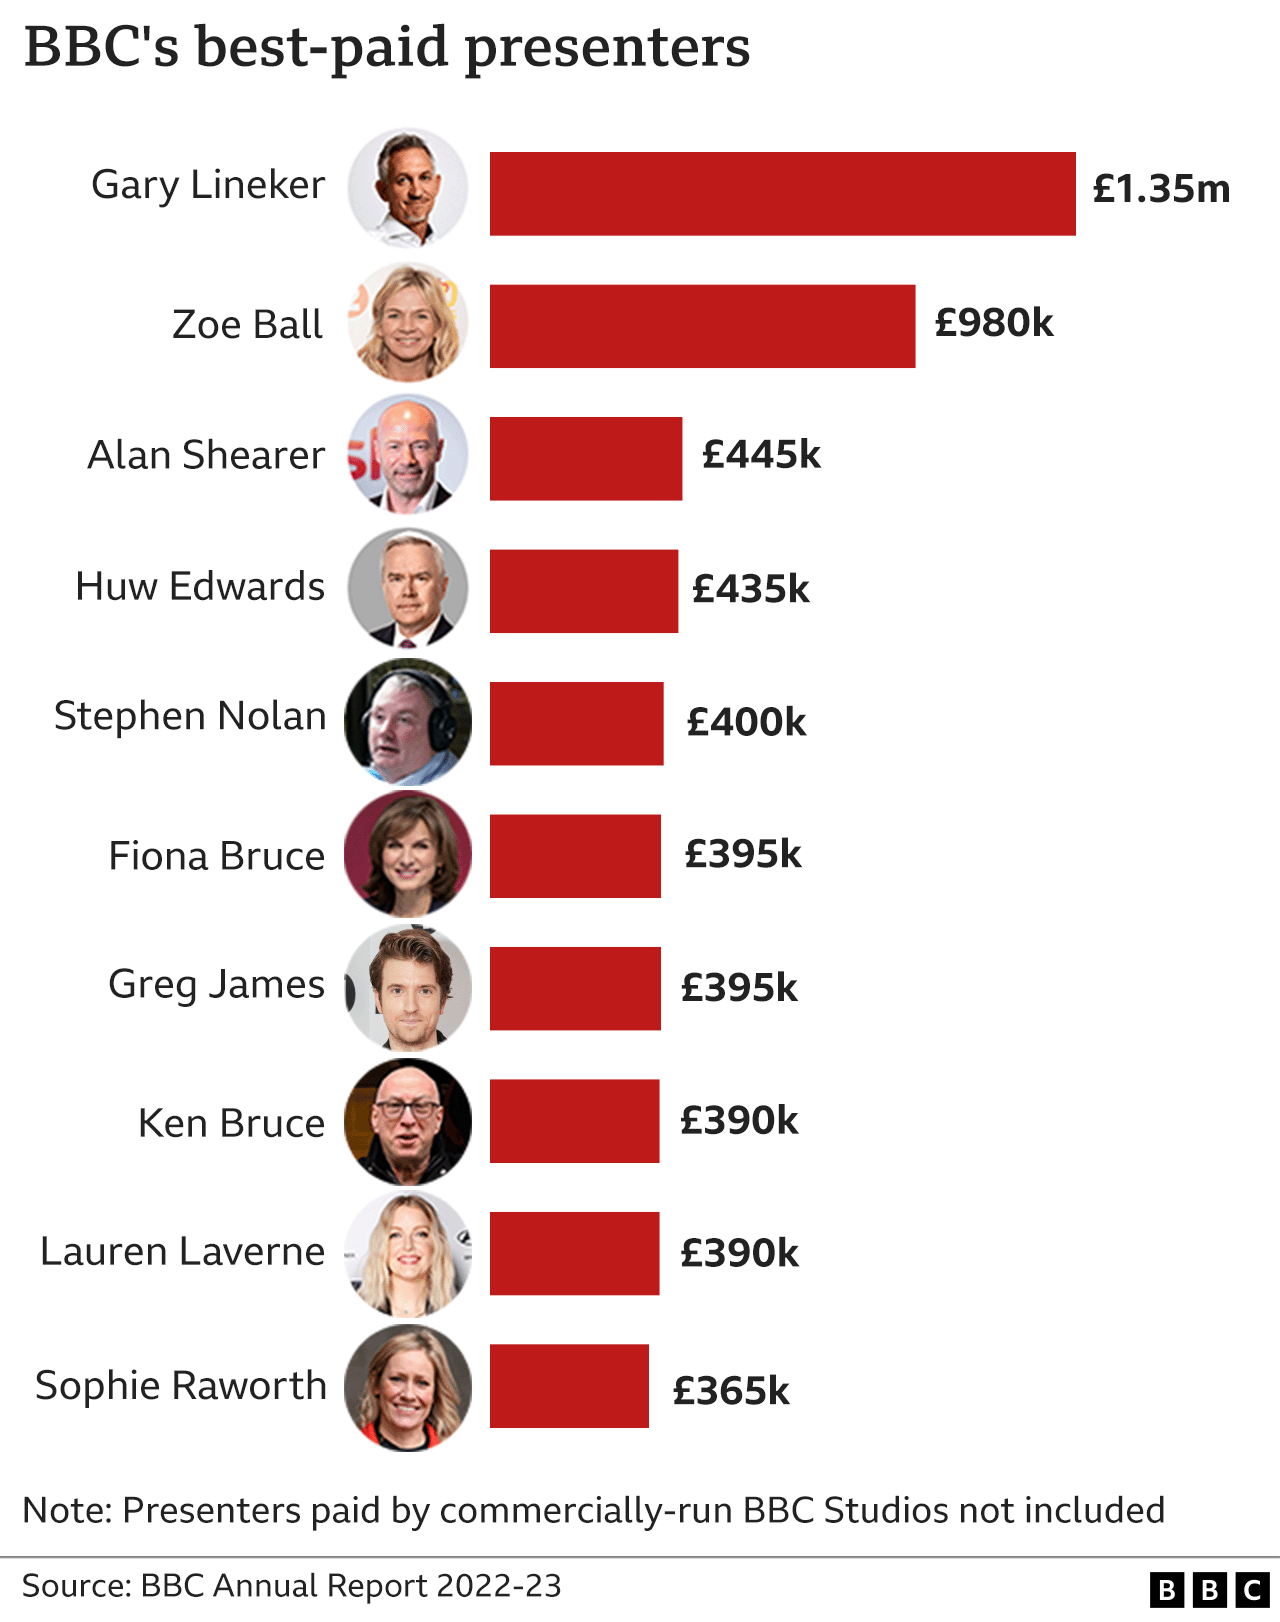 Graphic showing the 10 best-paid BBC presenters in 2022-23 according to the BBCs Annual Report which does not include those paid by the commercially run BBC Studios They were Gary Lineker on 135m Zoe Ball 980k Alan Shearer 445k Huw Edwards 435k Stephen Nolan 400k Fiona Bruce 395k Greg James 395k Ken Bruce 390k Lauren Laverne 390k and Sophie Raworth 365k